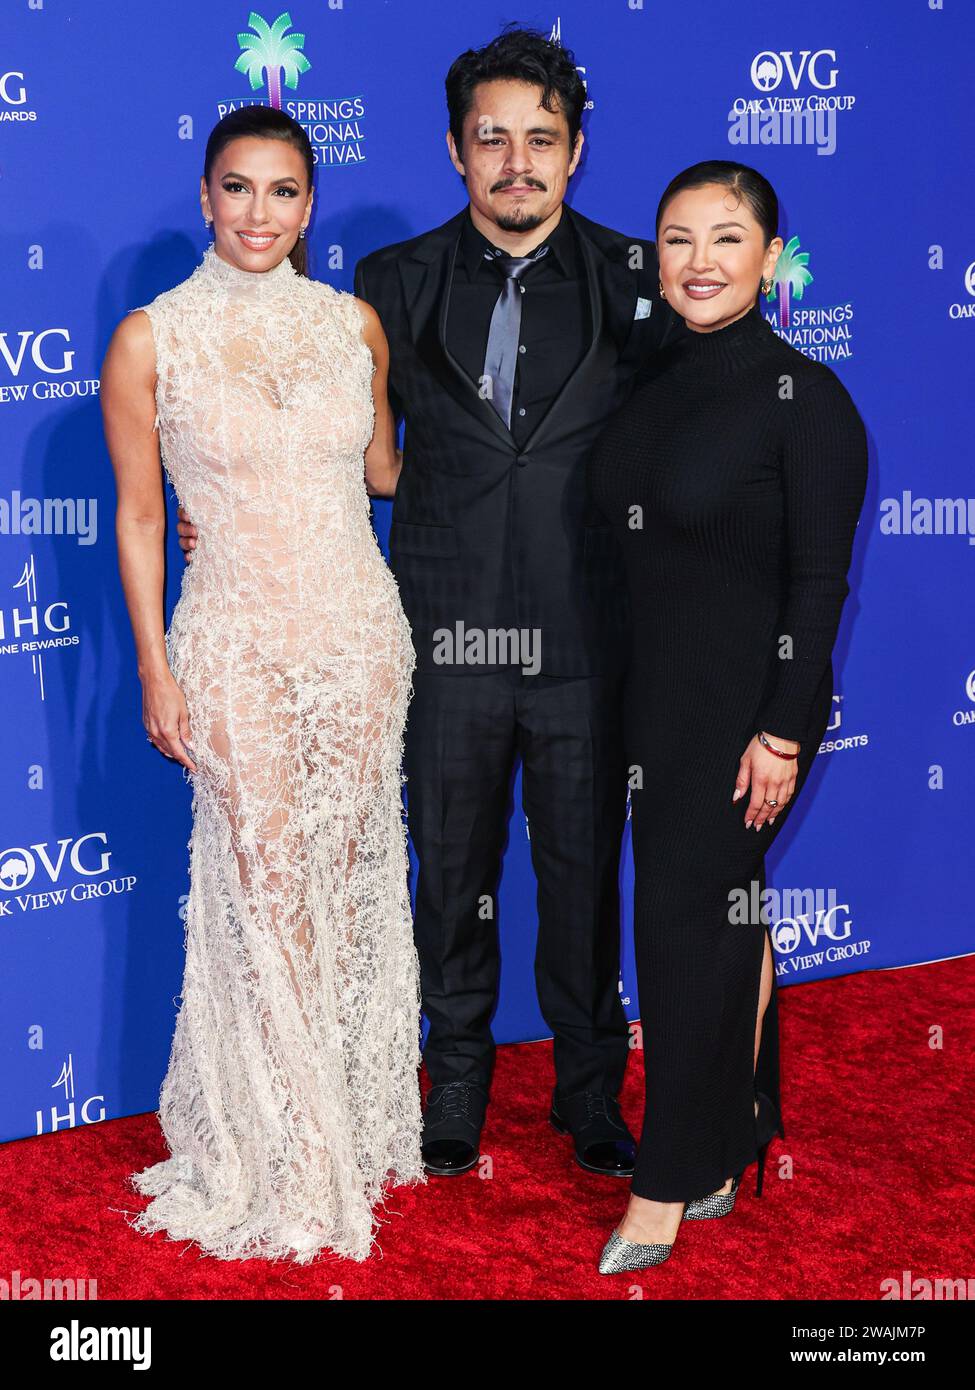 Palm Springs, United States. 04th Jan, 2024. PALM SPRINGS, RIVERSIDE COUNTY, CALIFORNIA, USA - JANUARY 04: Eva Longoria, Jesse Garcia and Annie Gonzalez arrive at the 35th Annual Palm Springs International Film Festival Film Awards held at the Palm Springs Convention Center on January 4, 2024 in Palm Springs, Riverside County, California, United States. (Photo by Xavier Collin/Image Press Agency) Credit: Image Press Agency/Alamy Live News Stock Photo